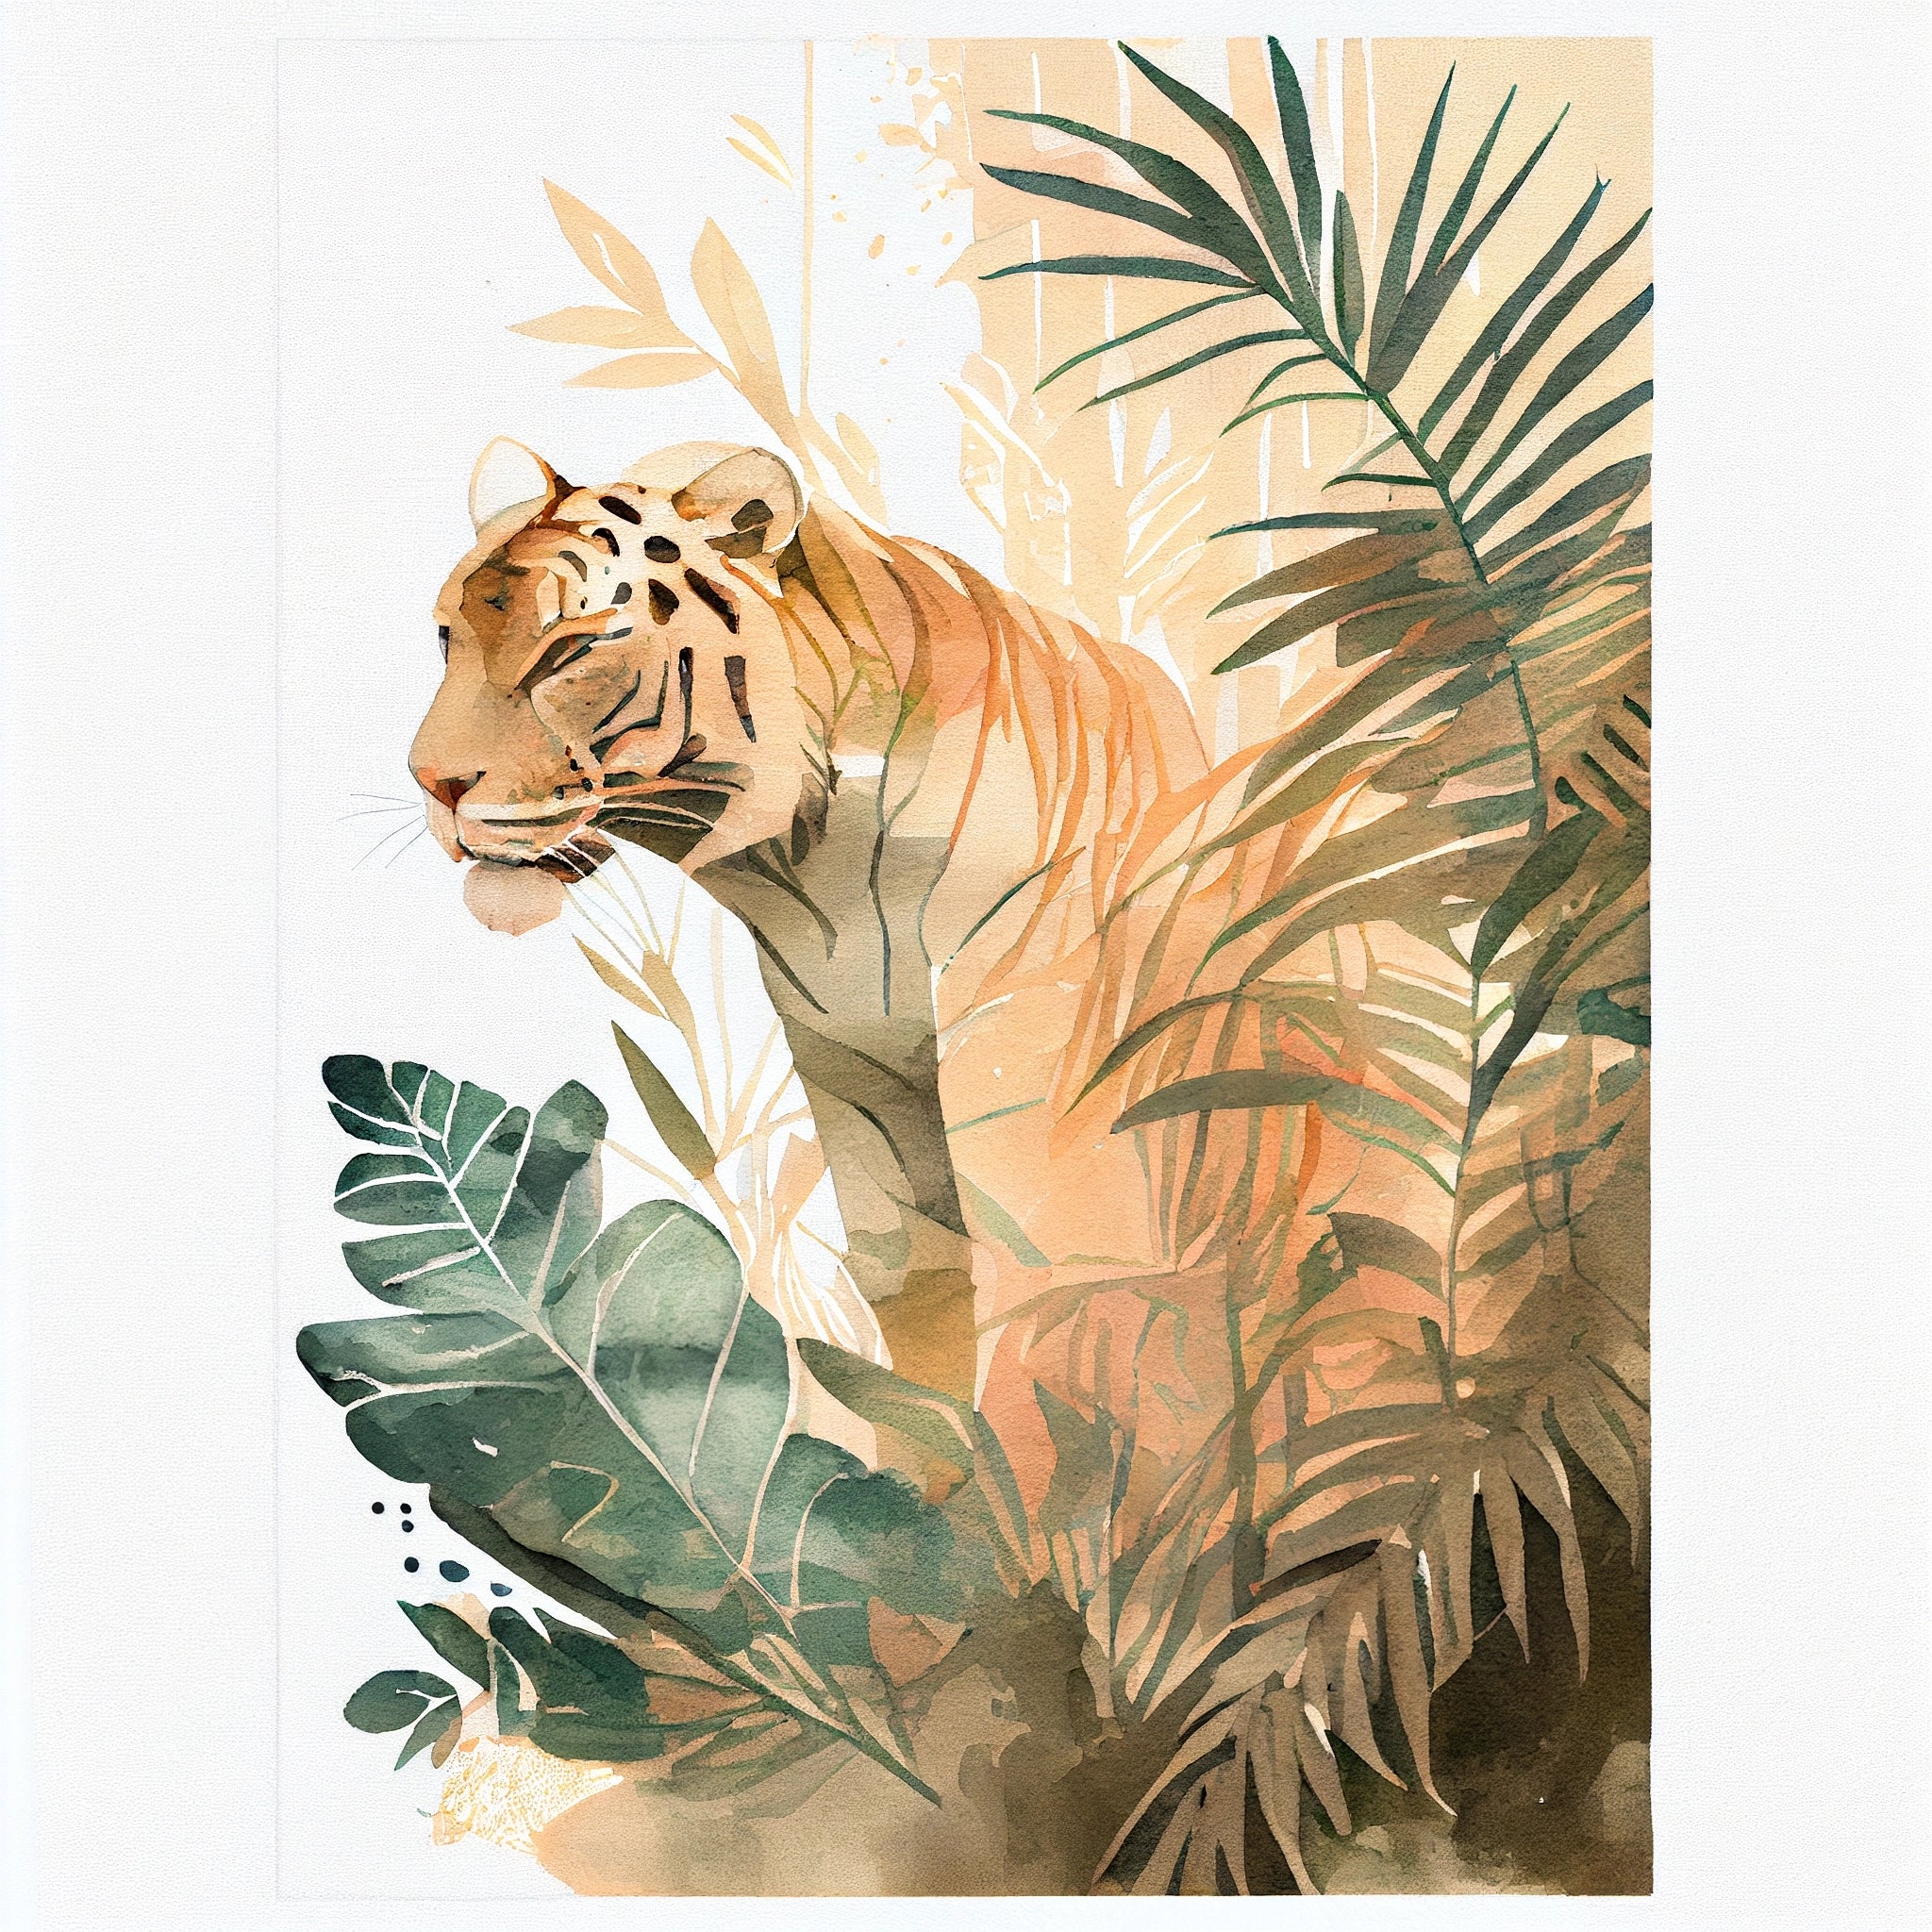 "A Watercolor Graphic Print of a Tiger in a Jungle on a Light Peach Base Color"